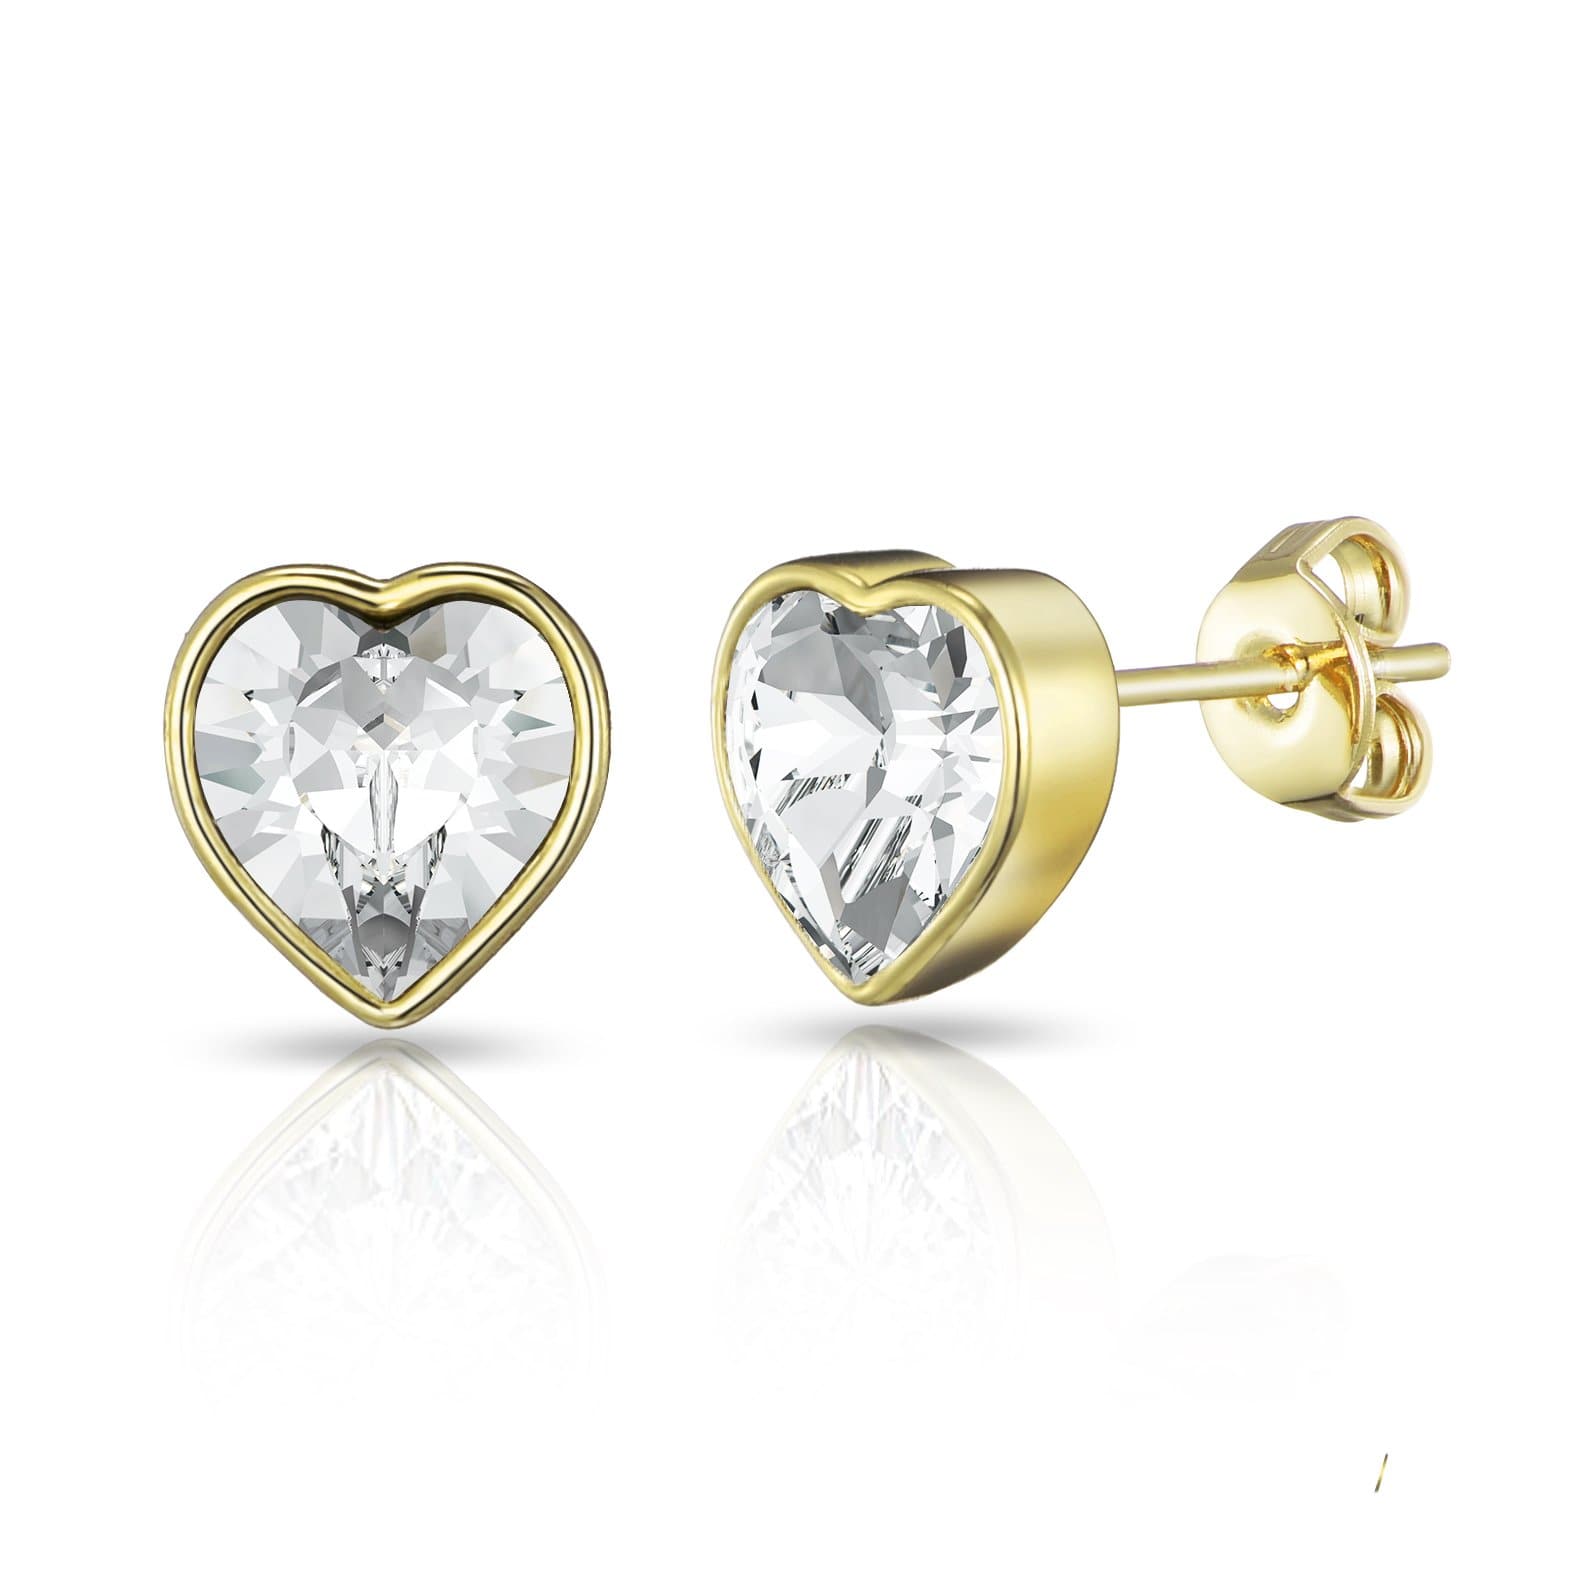 Gold Plated Bezel set Heart Earrings Created with Zircondia® Crystals by Philip Jones Jewellery